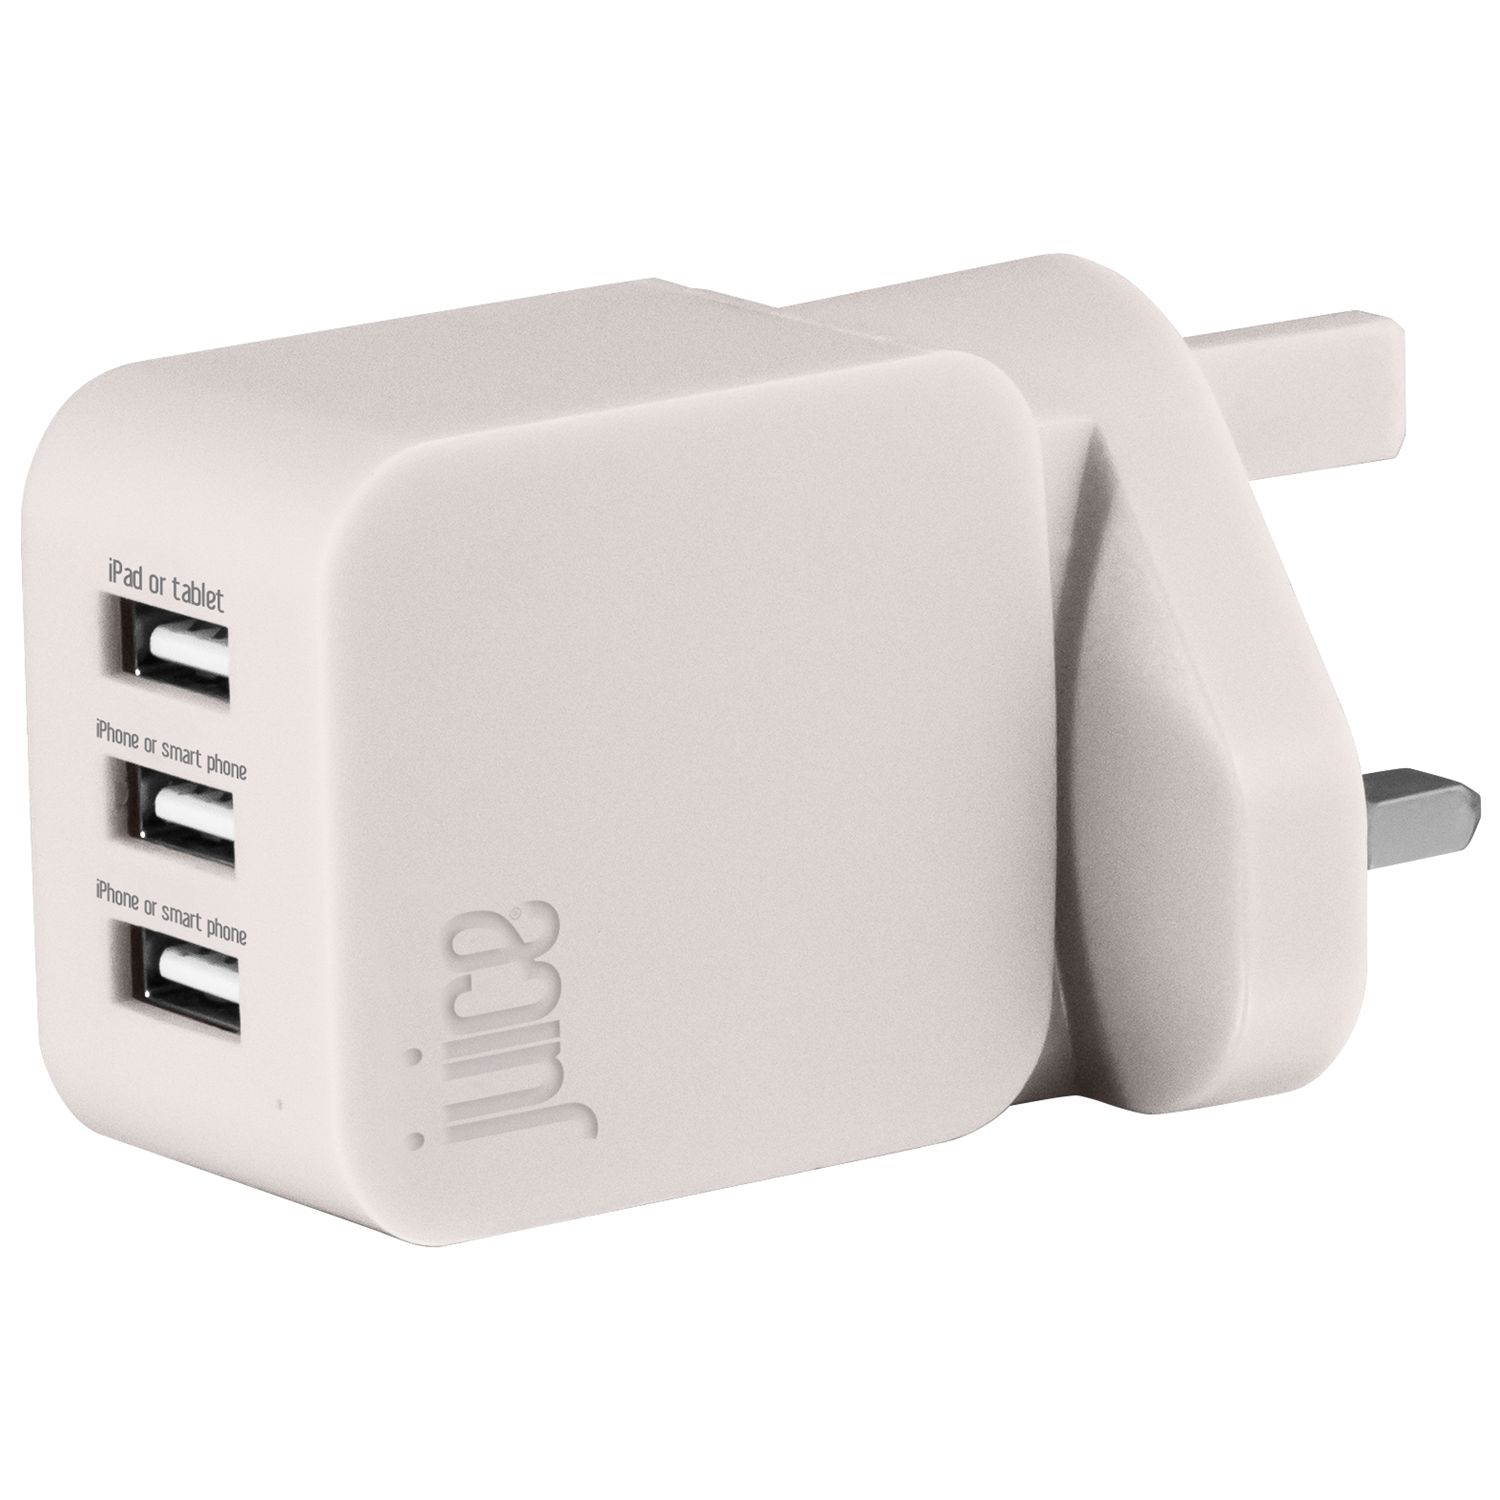 Juice Triple USB 3.0 Mains Charger, White